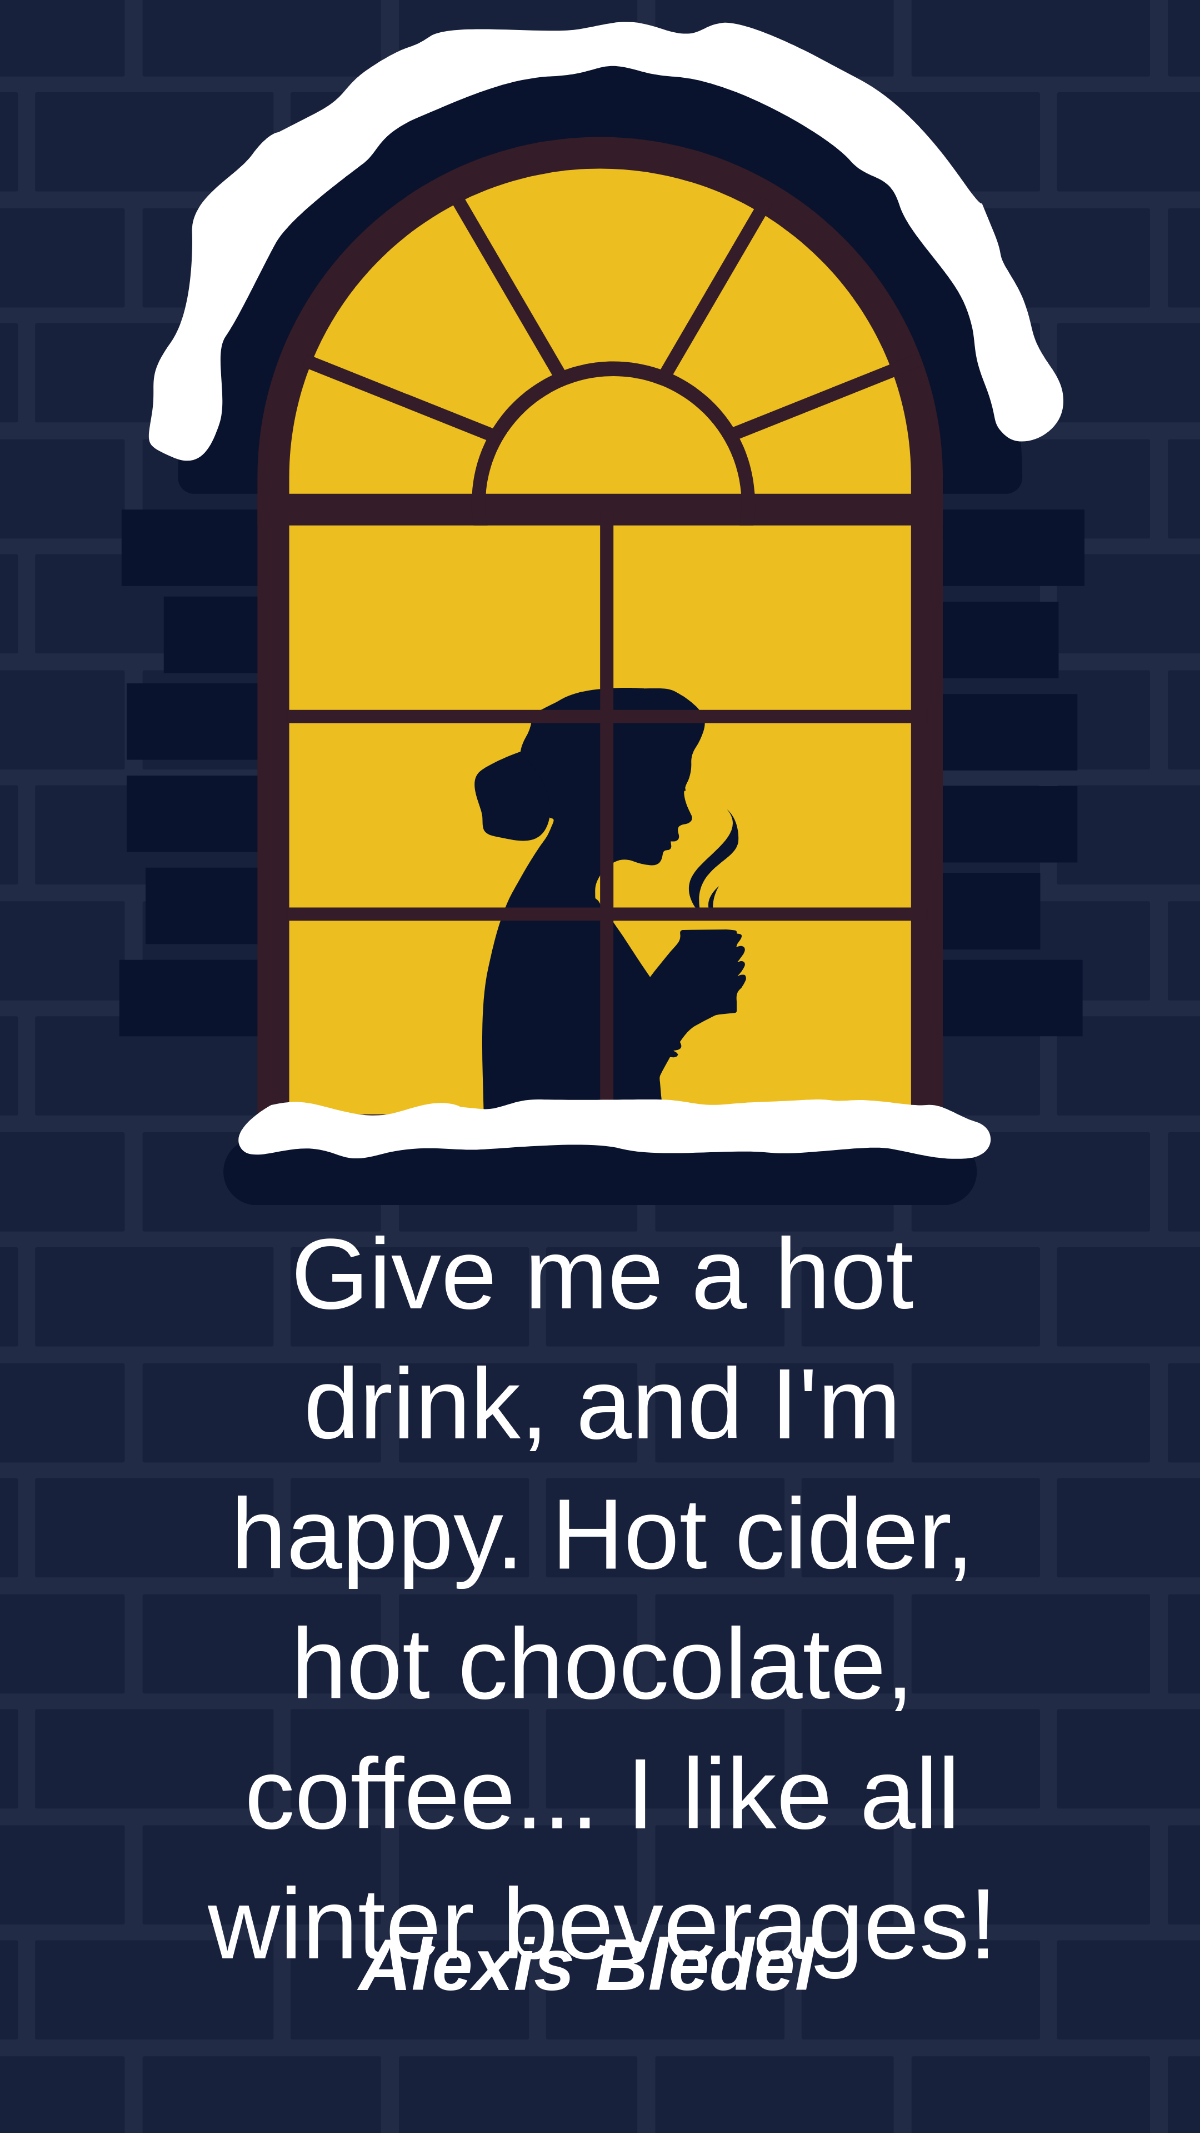 Alexis Bledel - Give me a hot drink, and I'm happy. Hot cider, hot chocolate, coffee... I like all winter beverages! Template